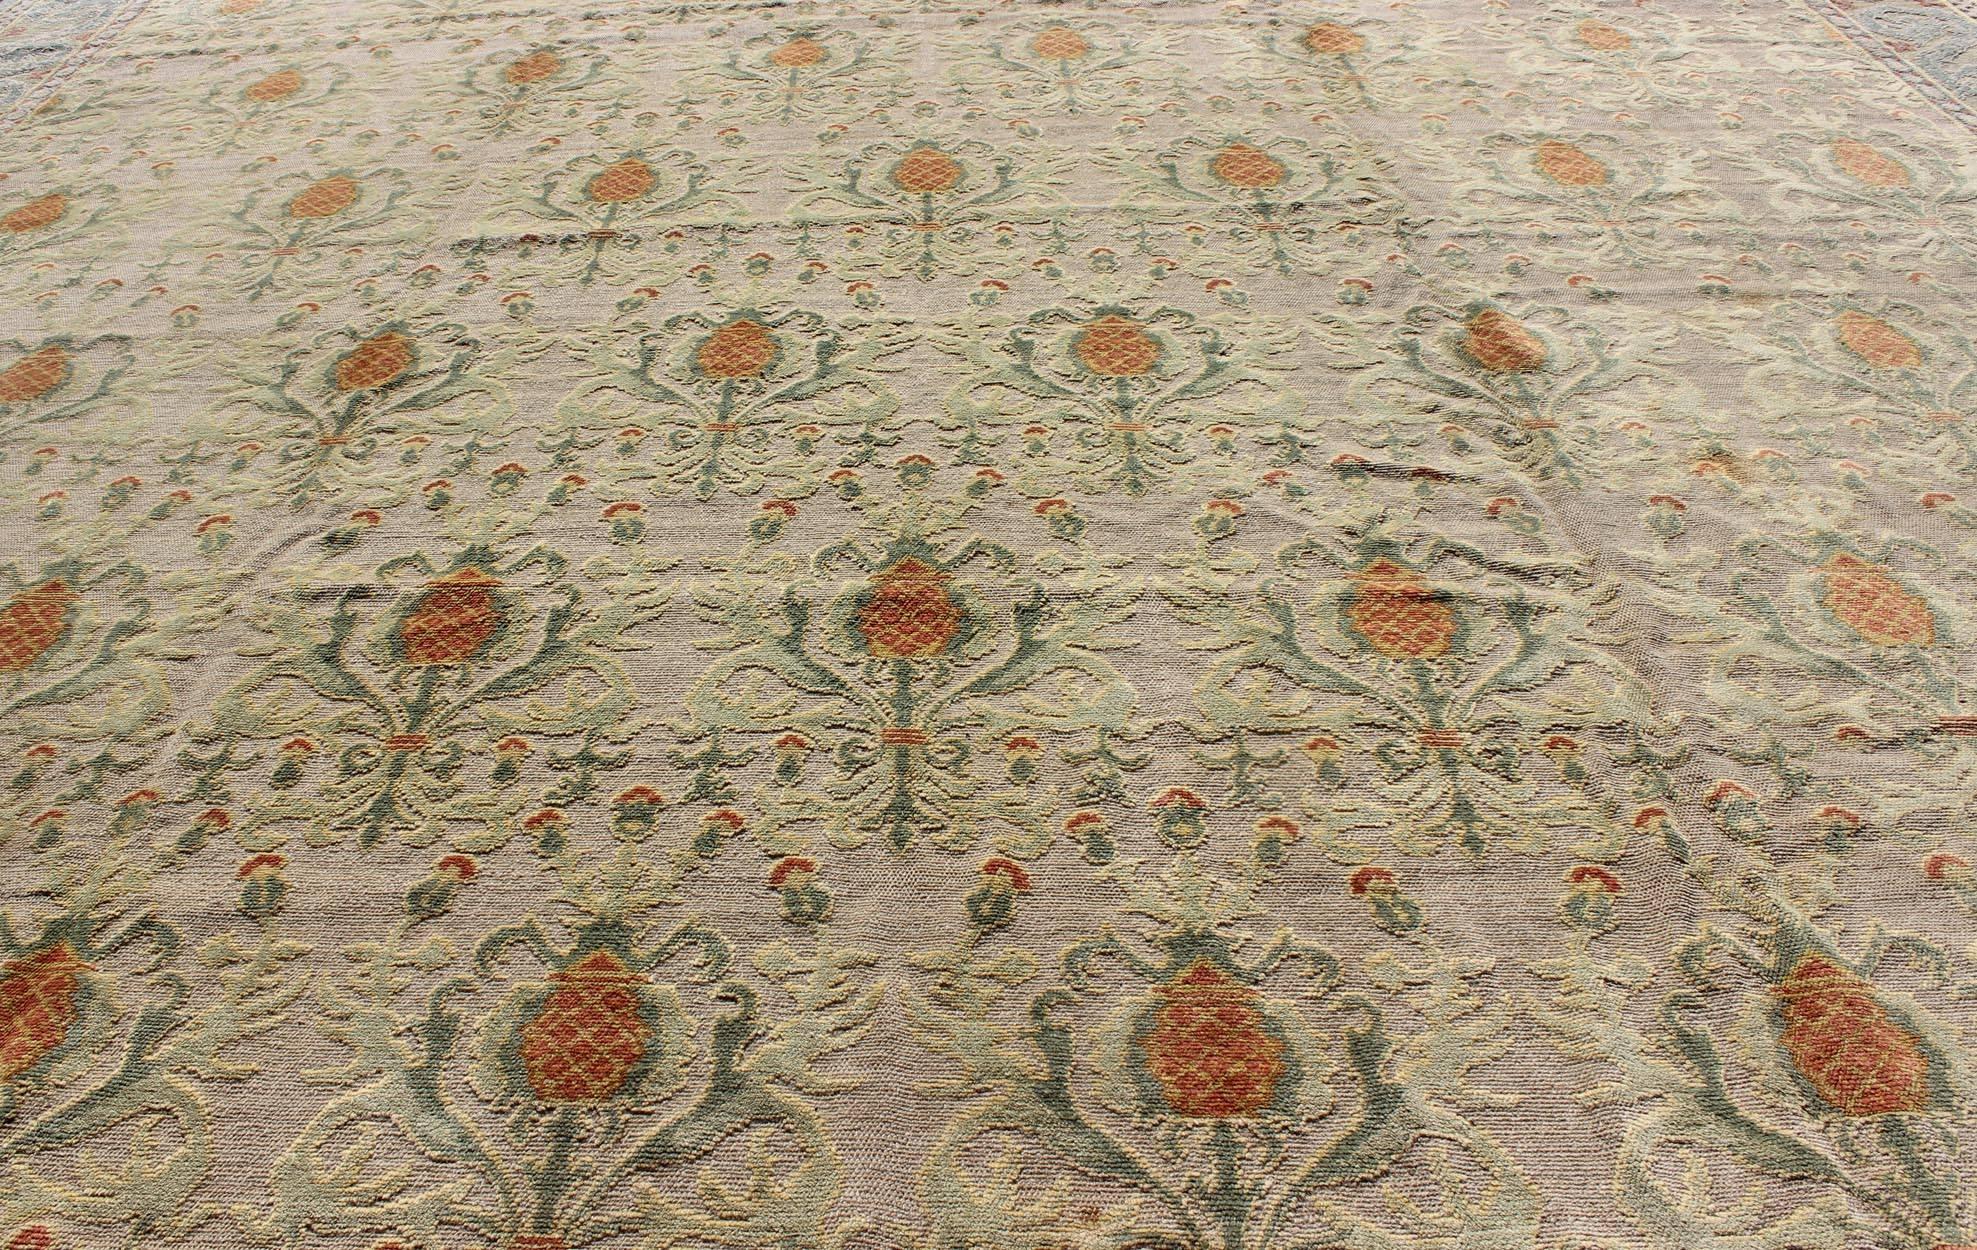 Wool Square Sized Antique Spanish Carpet in Green, Orange and Gray/Blue